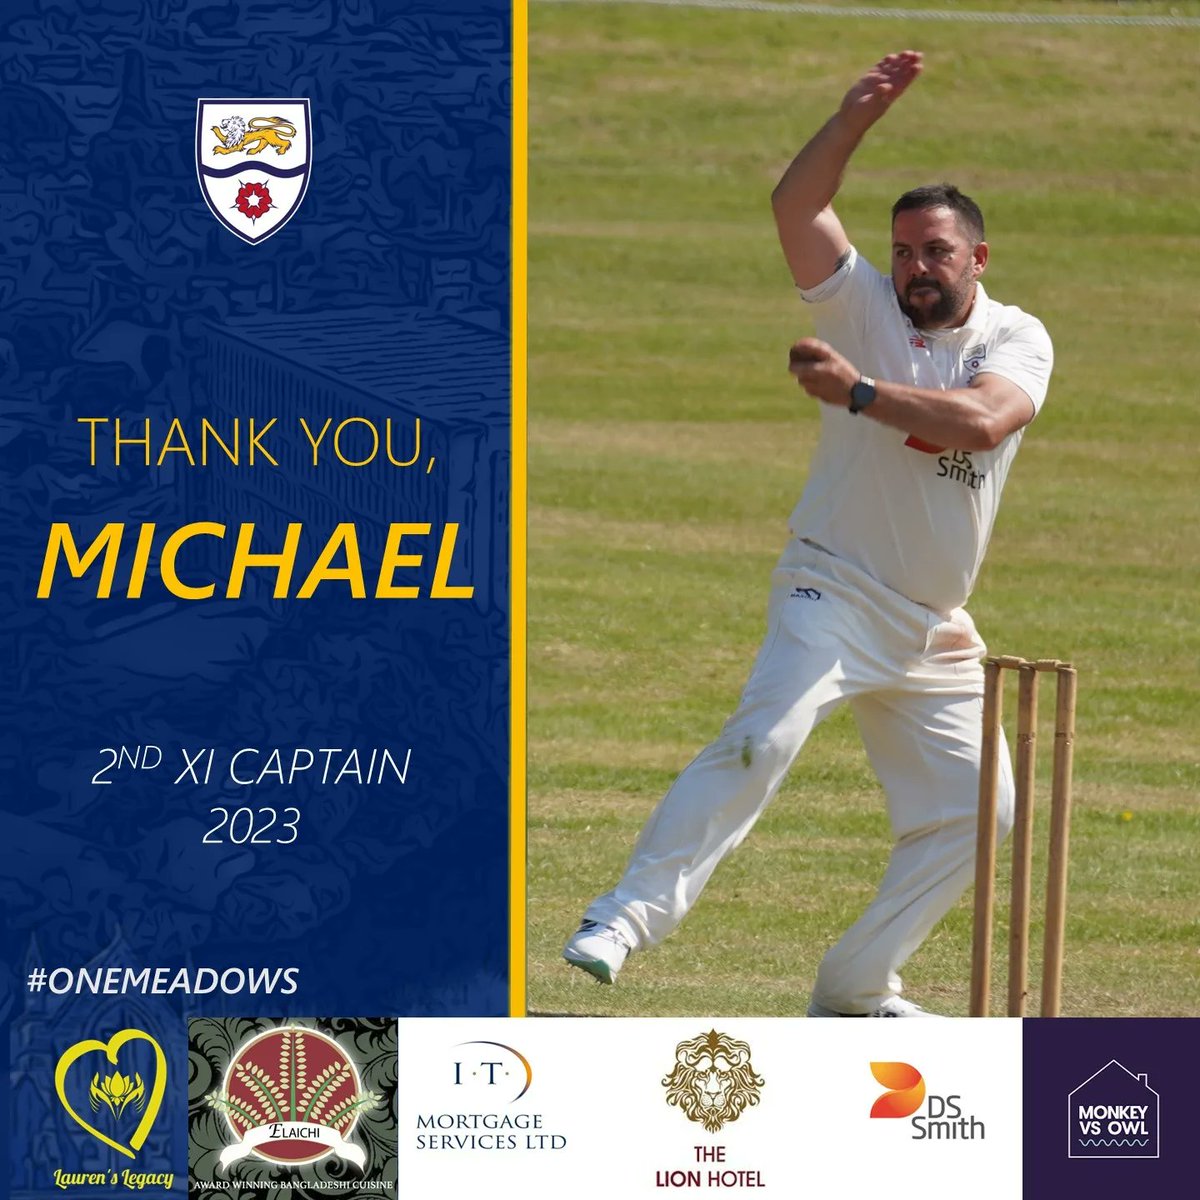 We are delighted to announce that James Cholerton will be the 2nd XI captain for the 2024 season! We would like to thank Michael Jackson for captaining the 2nd XI last season, helping them gain promotion into DCCL Division 3 North. #onemeadows